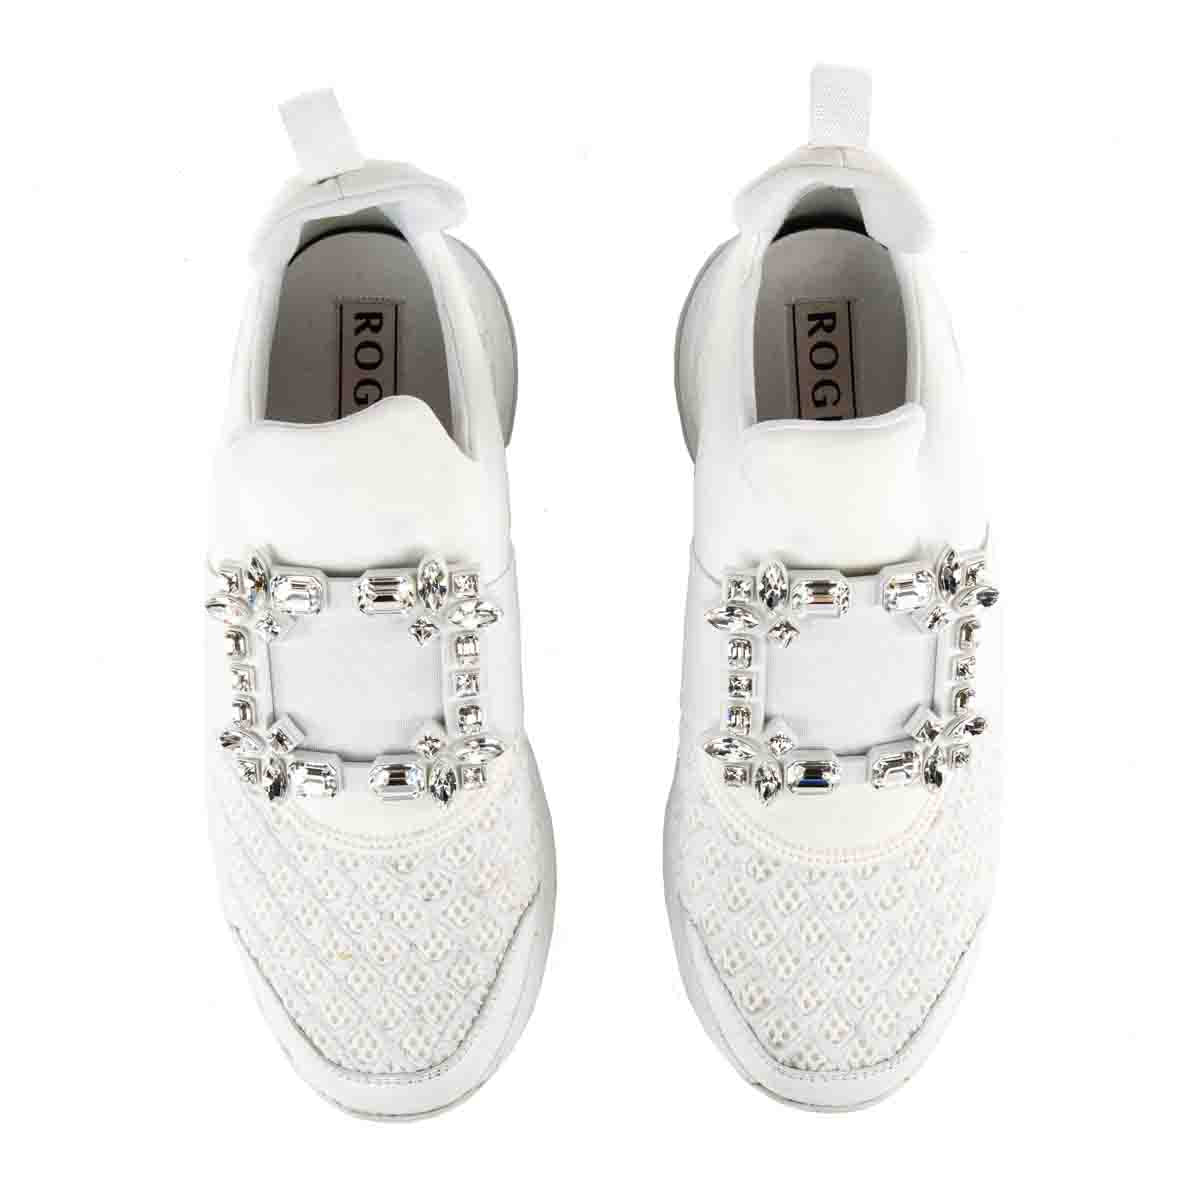 Roger Vivier White Chunky Sneakers Size US 7.5 | EU 37.5 - Love that Bag etc - Preowned Authentic Designer Handbags & Preloved Fashions